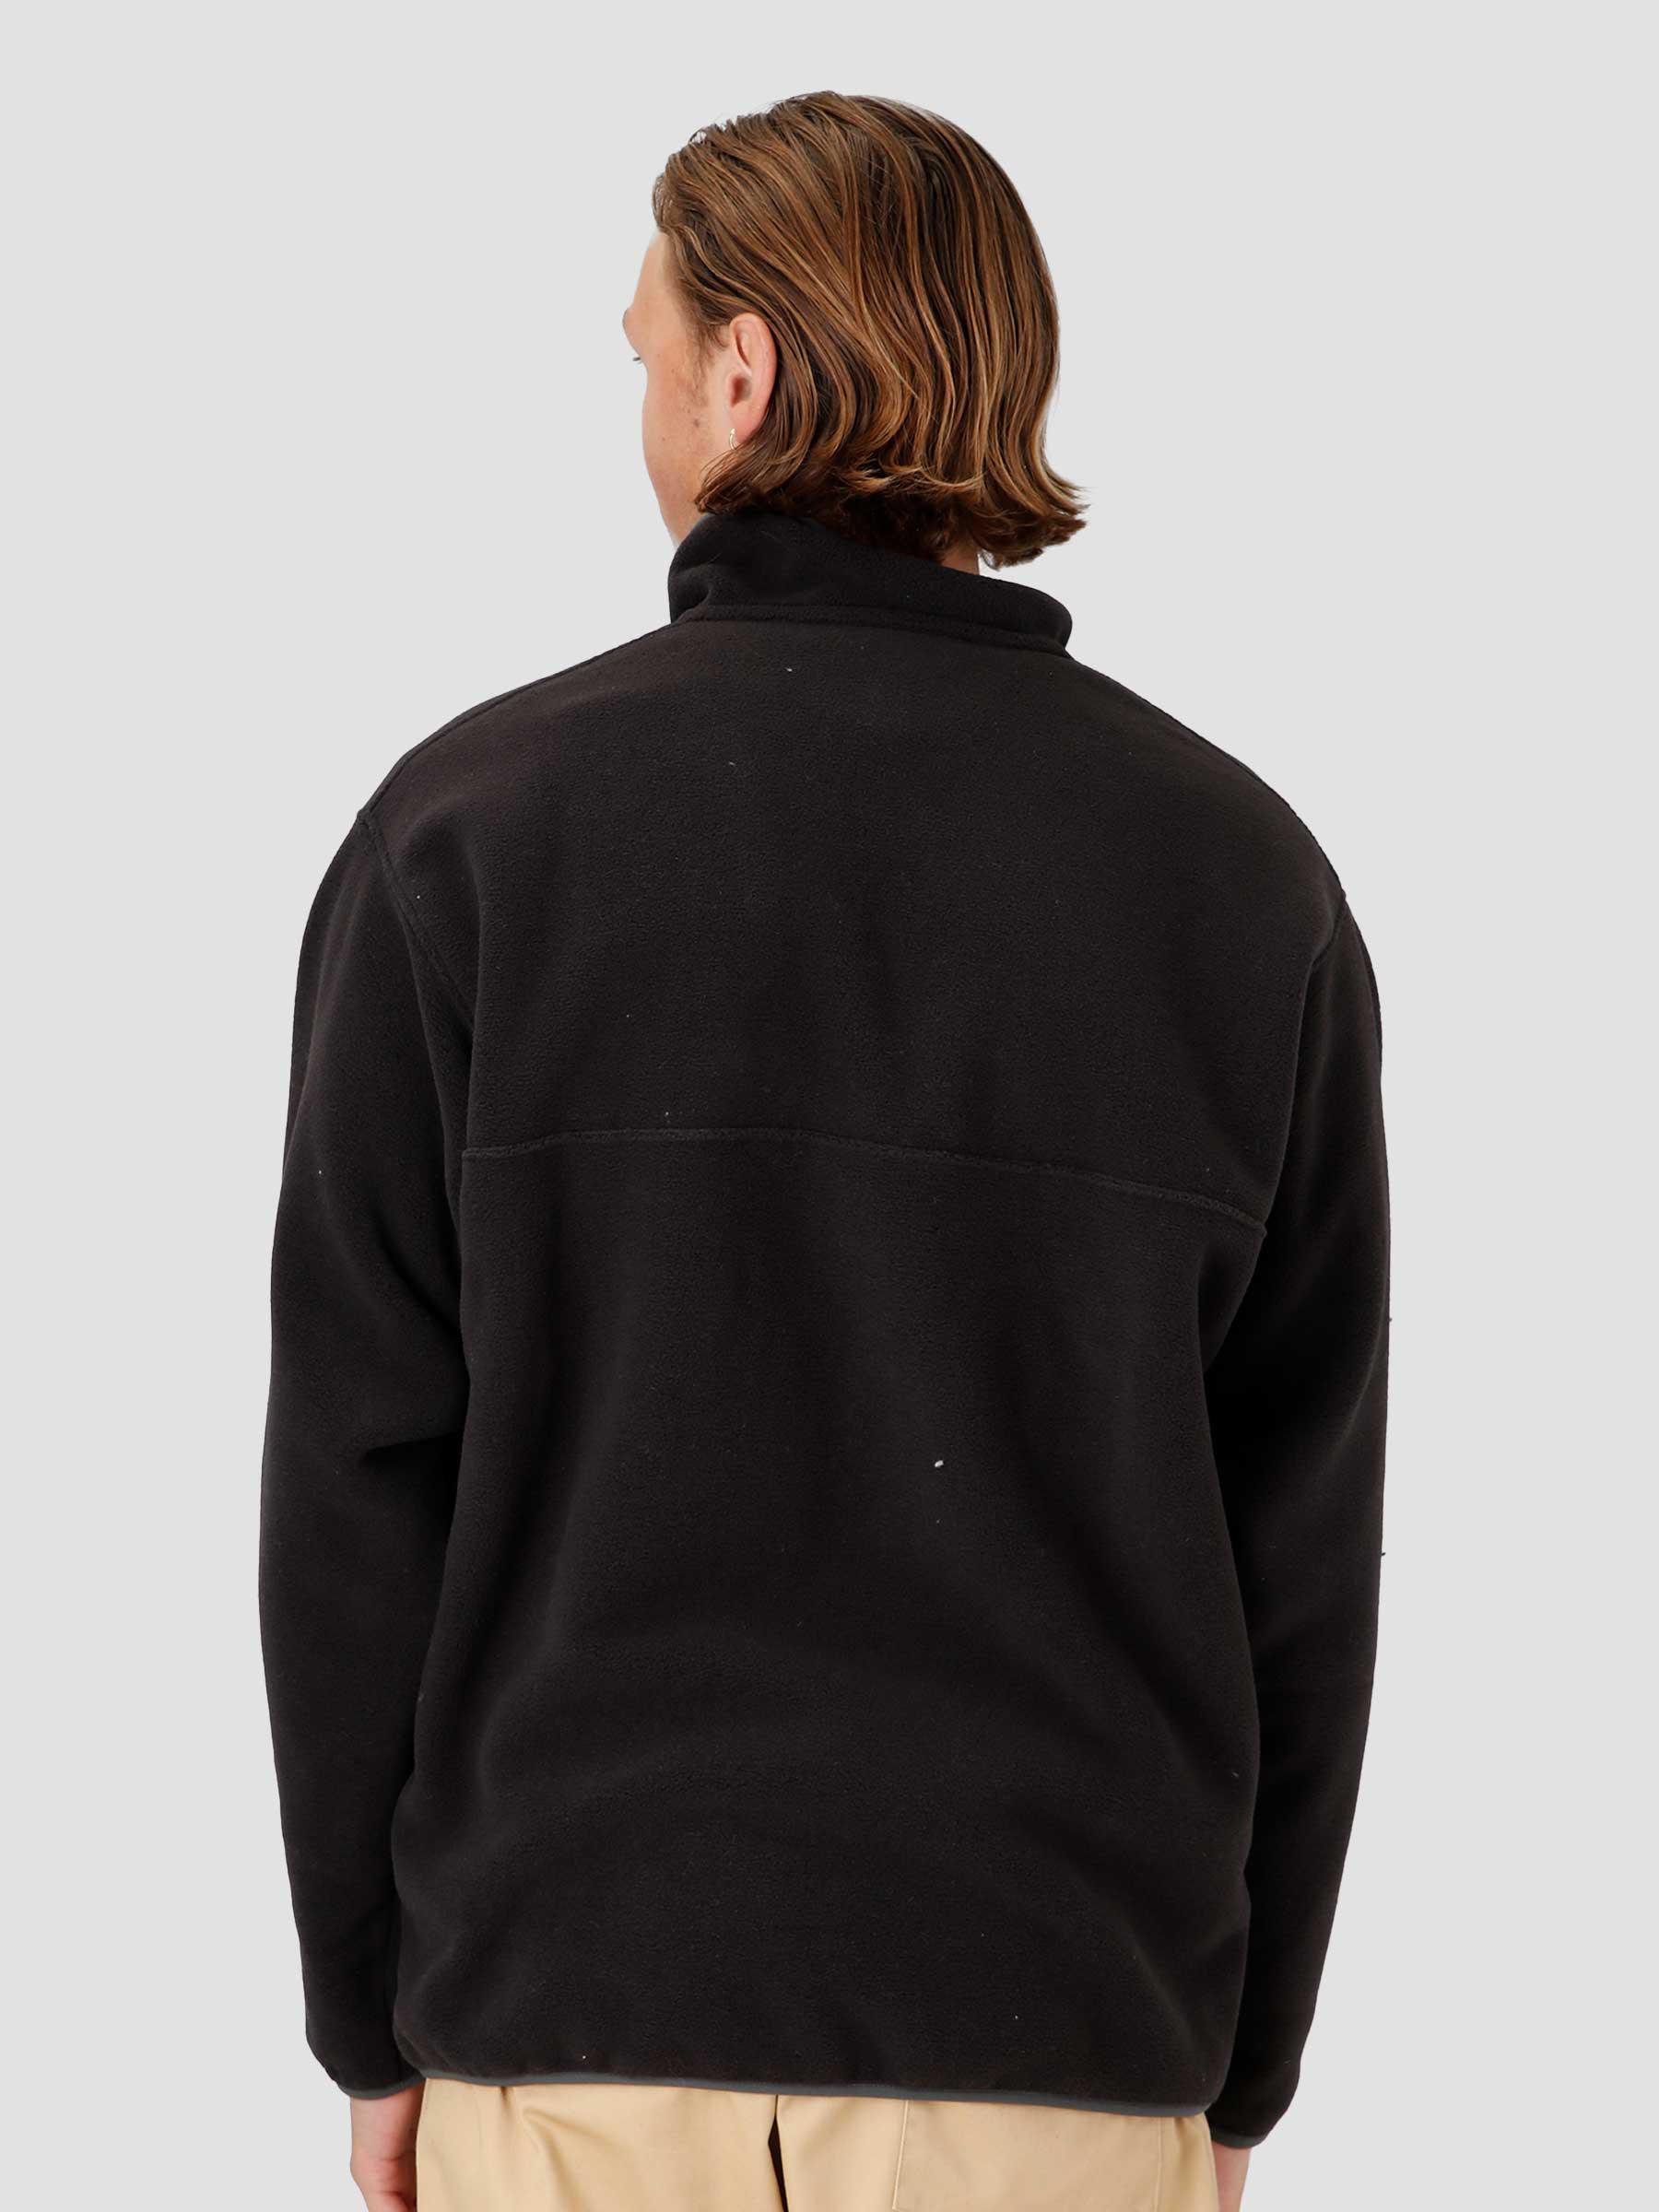 M's Synch Snap T Pullover Black w/Forge Grey 25450-BFO